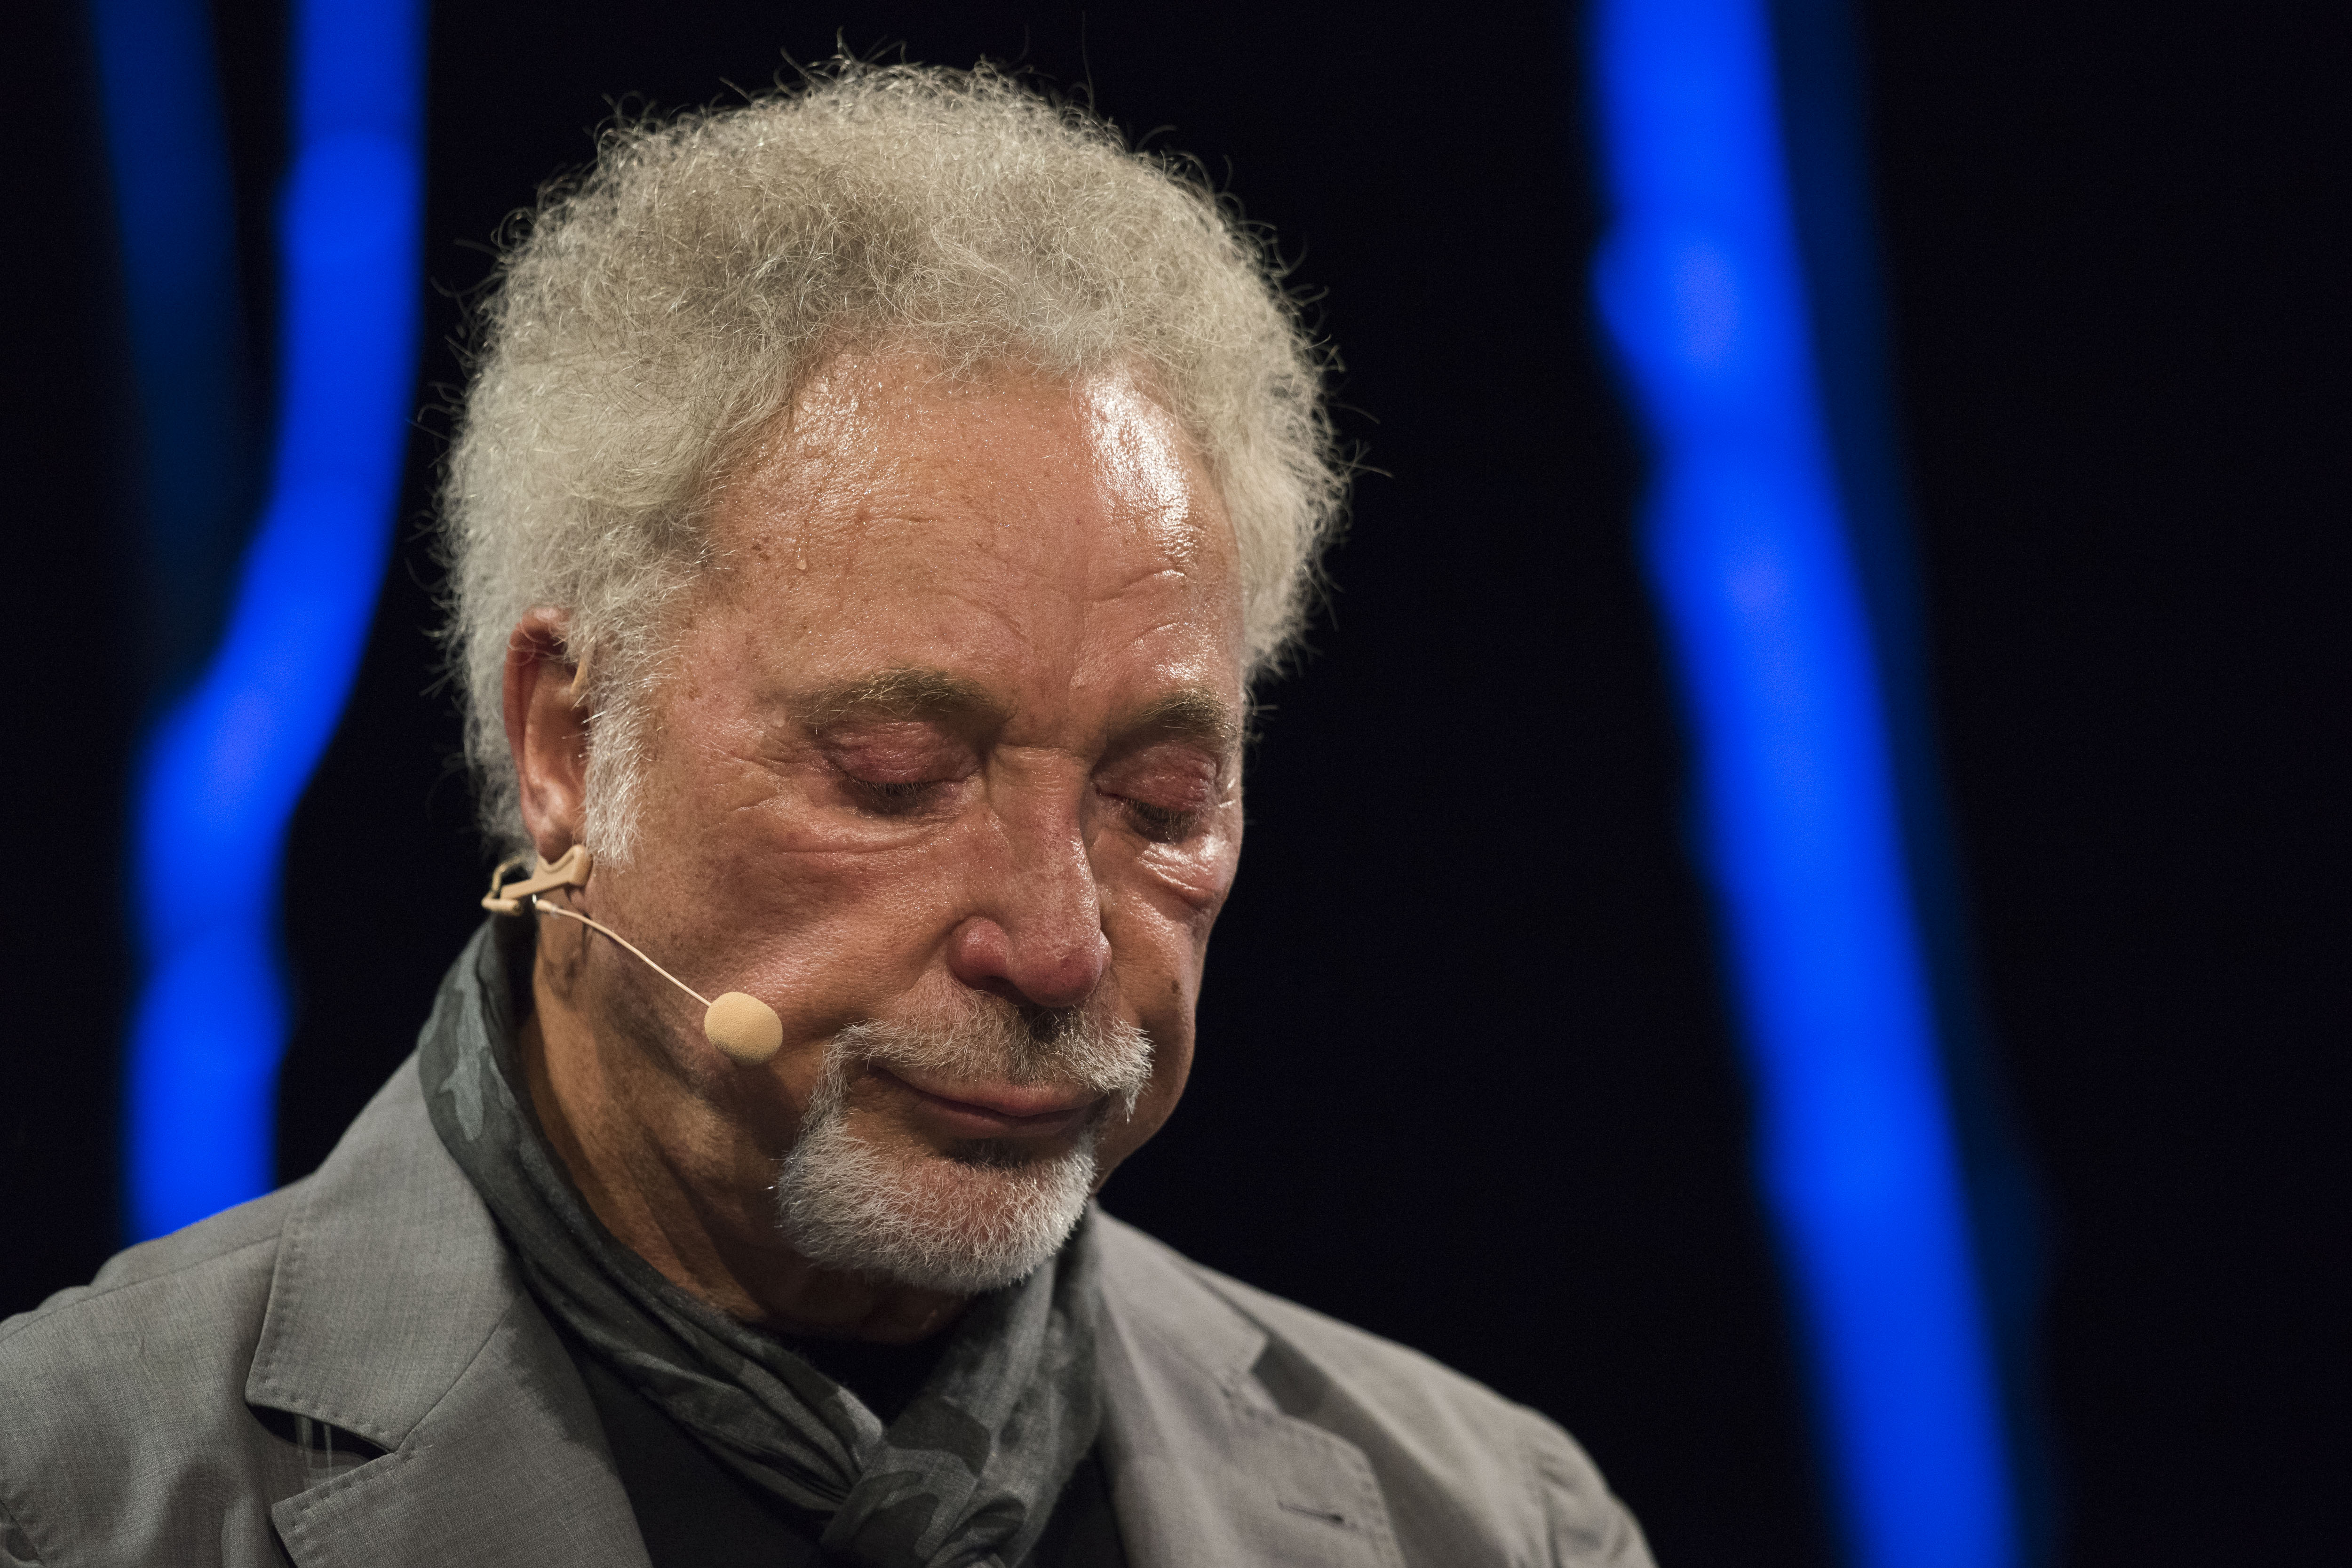 Tom Jones first public appearance since the death of his wife Melinda "Linda" Woodward. He appeared to fight back tears at the 2016 Hay Festivalon in Hay-on-Wye, Wales on June 5, 2016 | Source: Getty Images